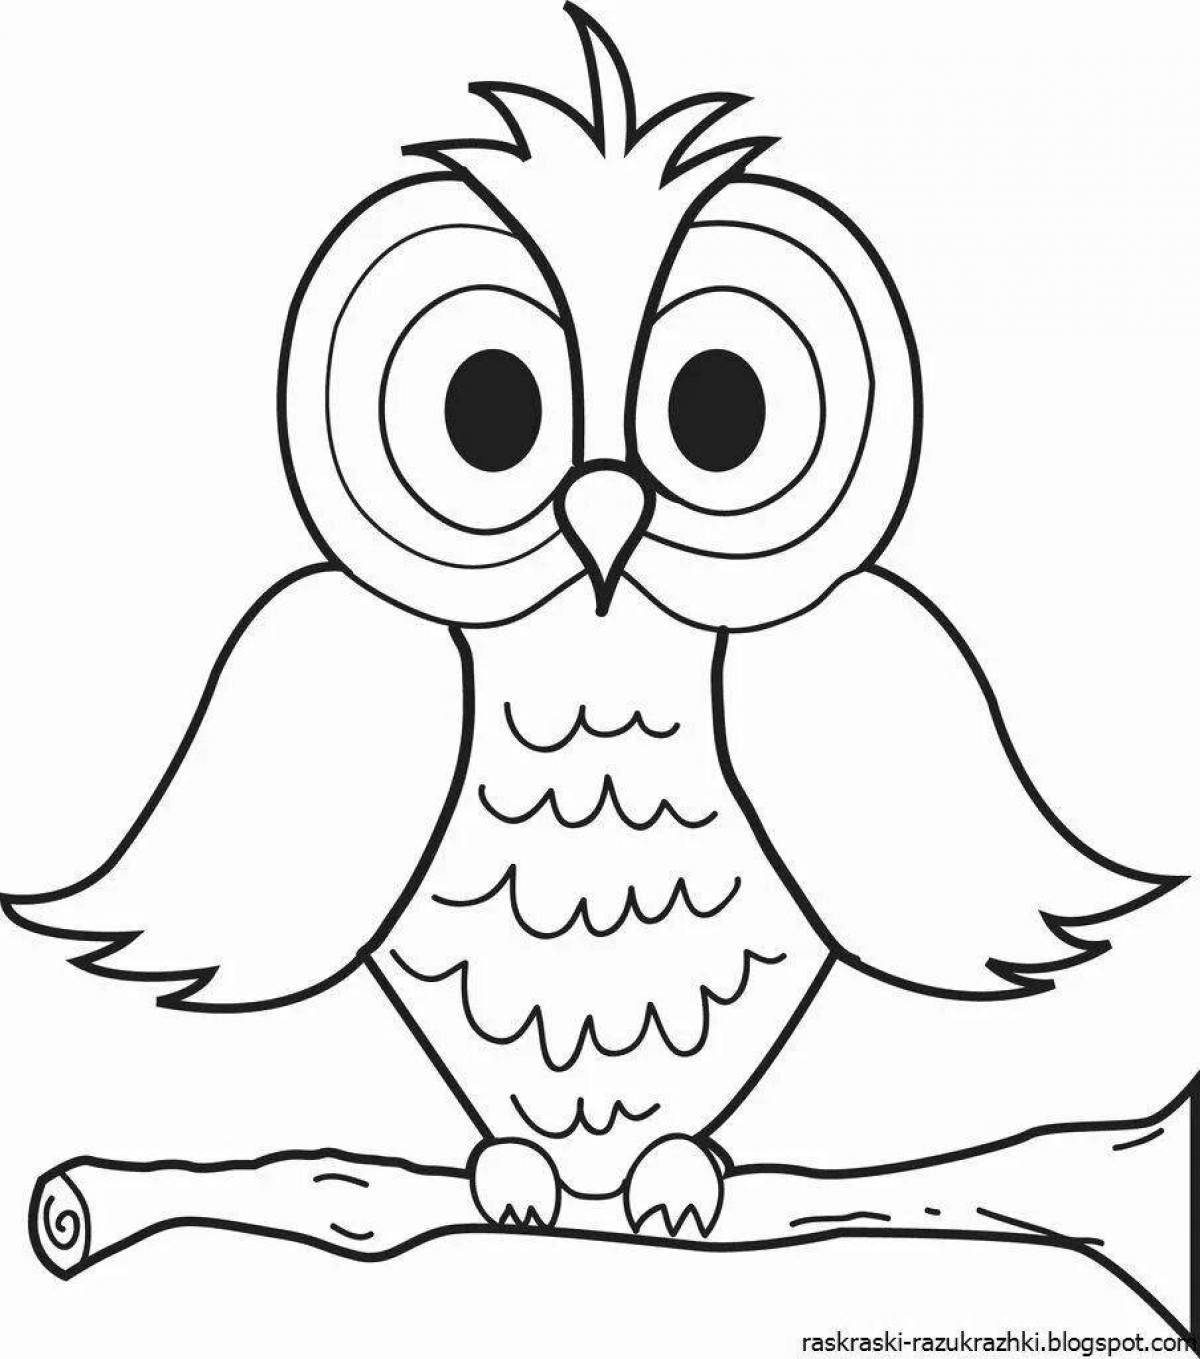 A wonderful owl coloring for children